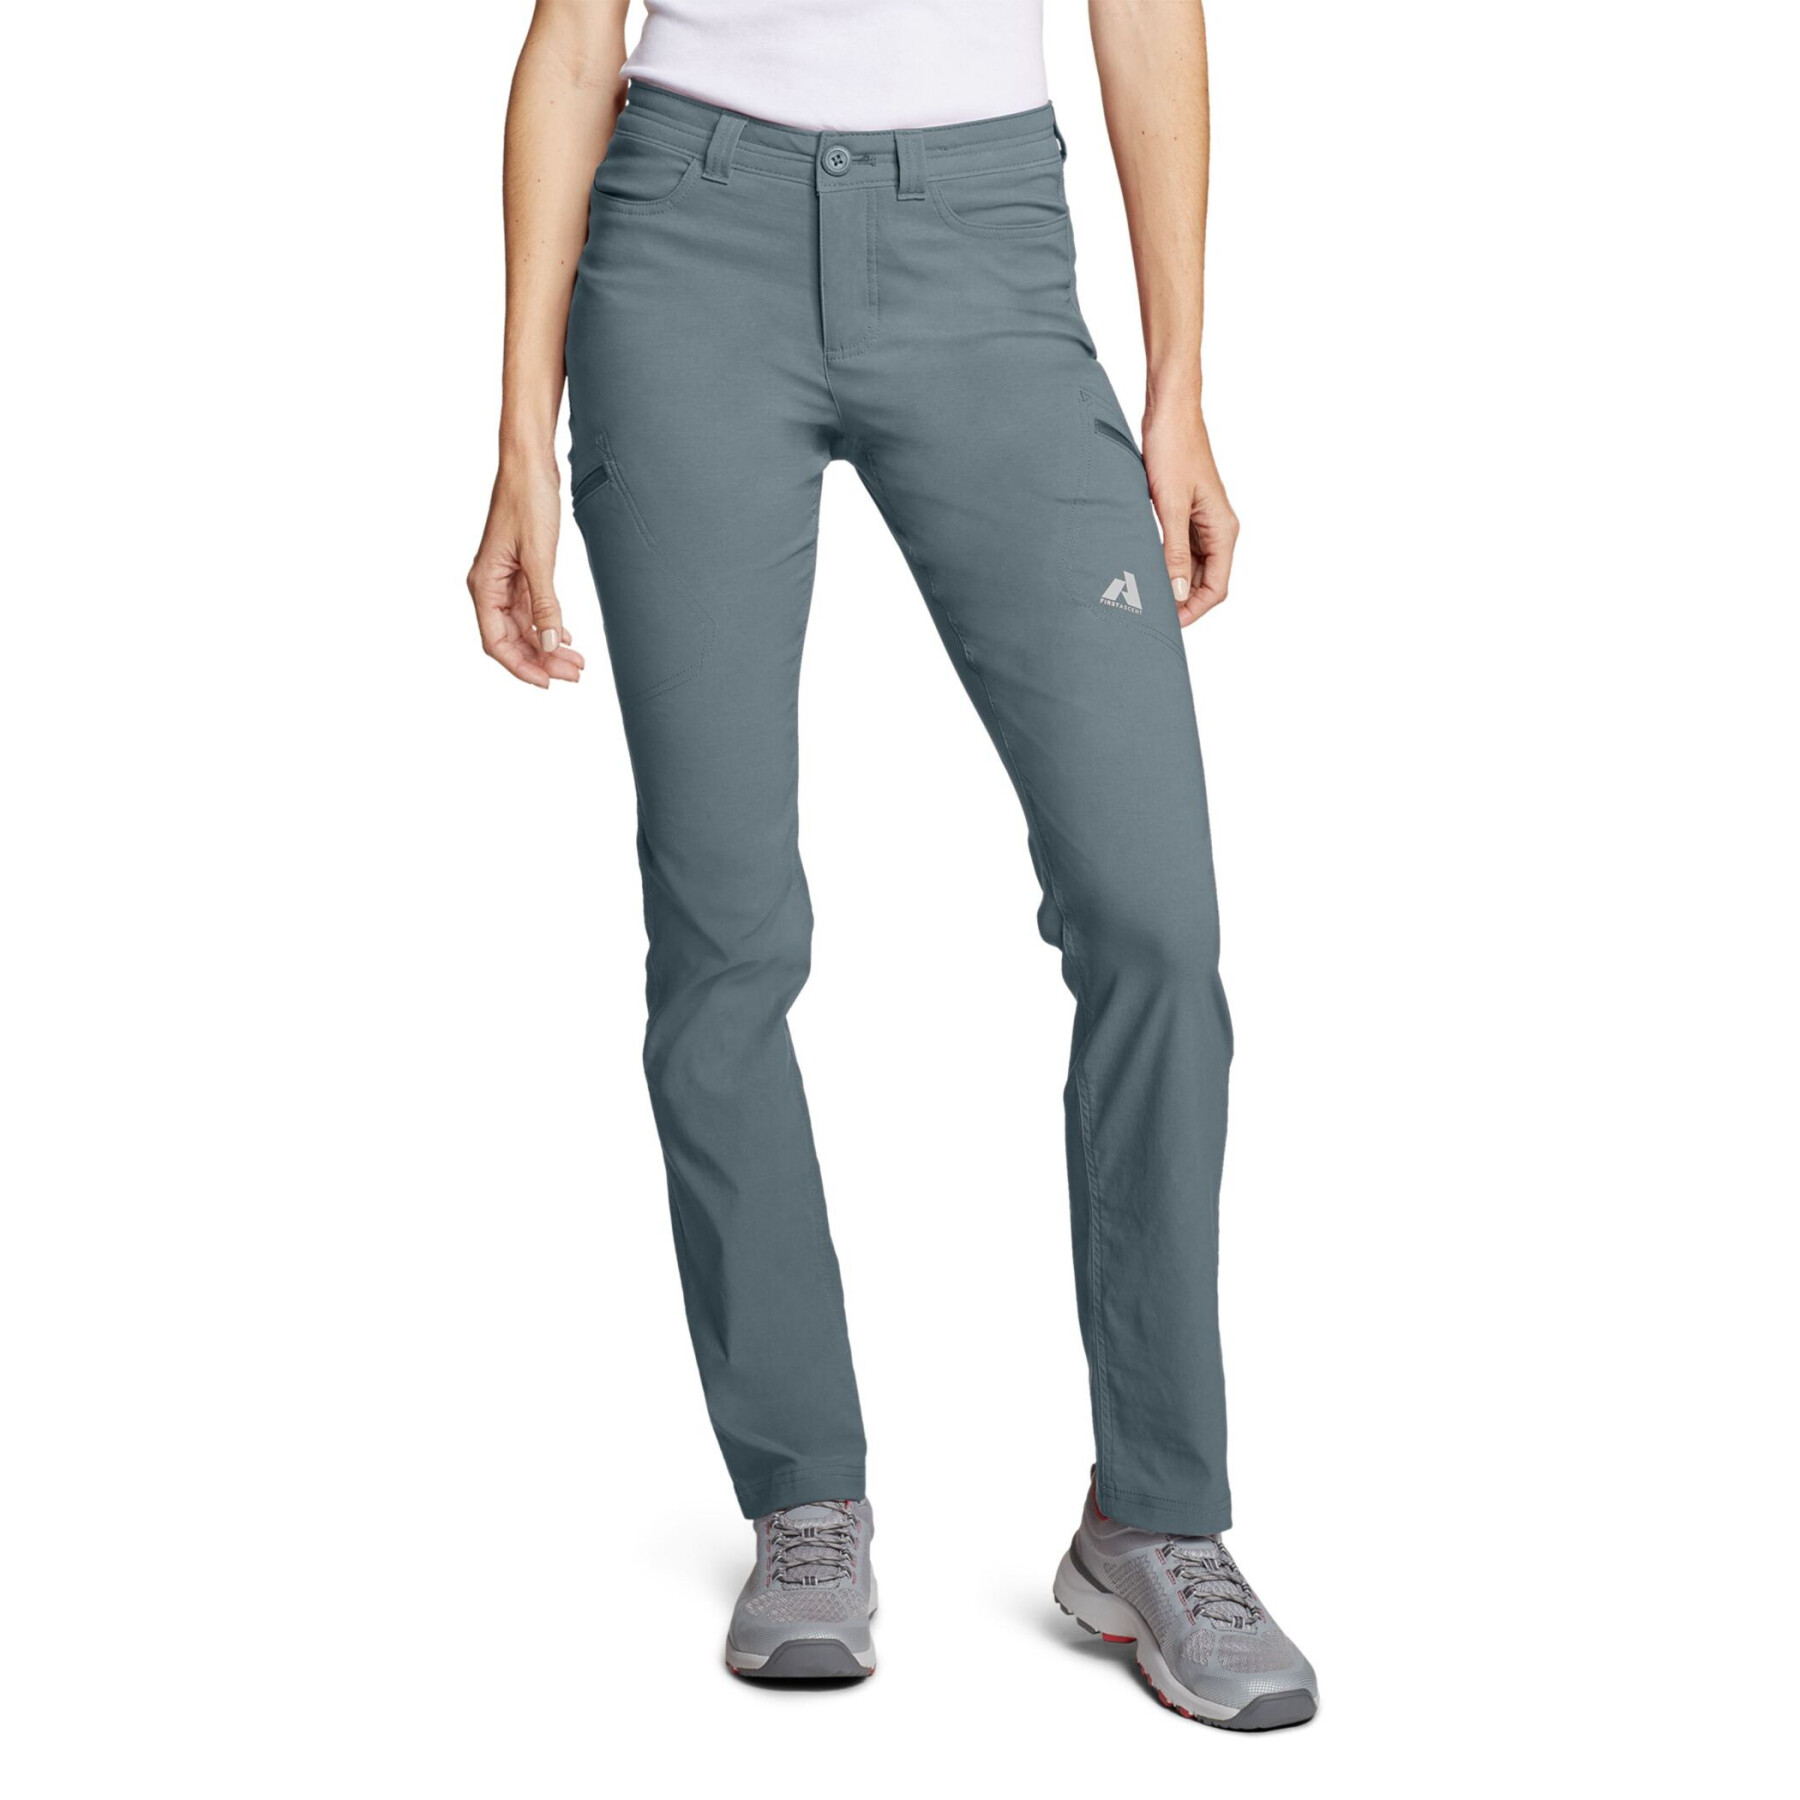 Girl's cargo pants Eddie Bauer Guide - Trousers & Jeans - Clothing